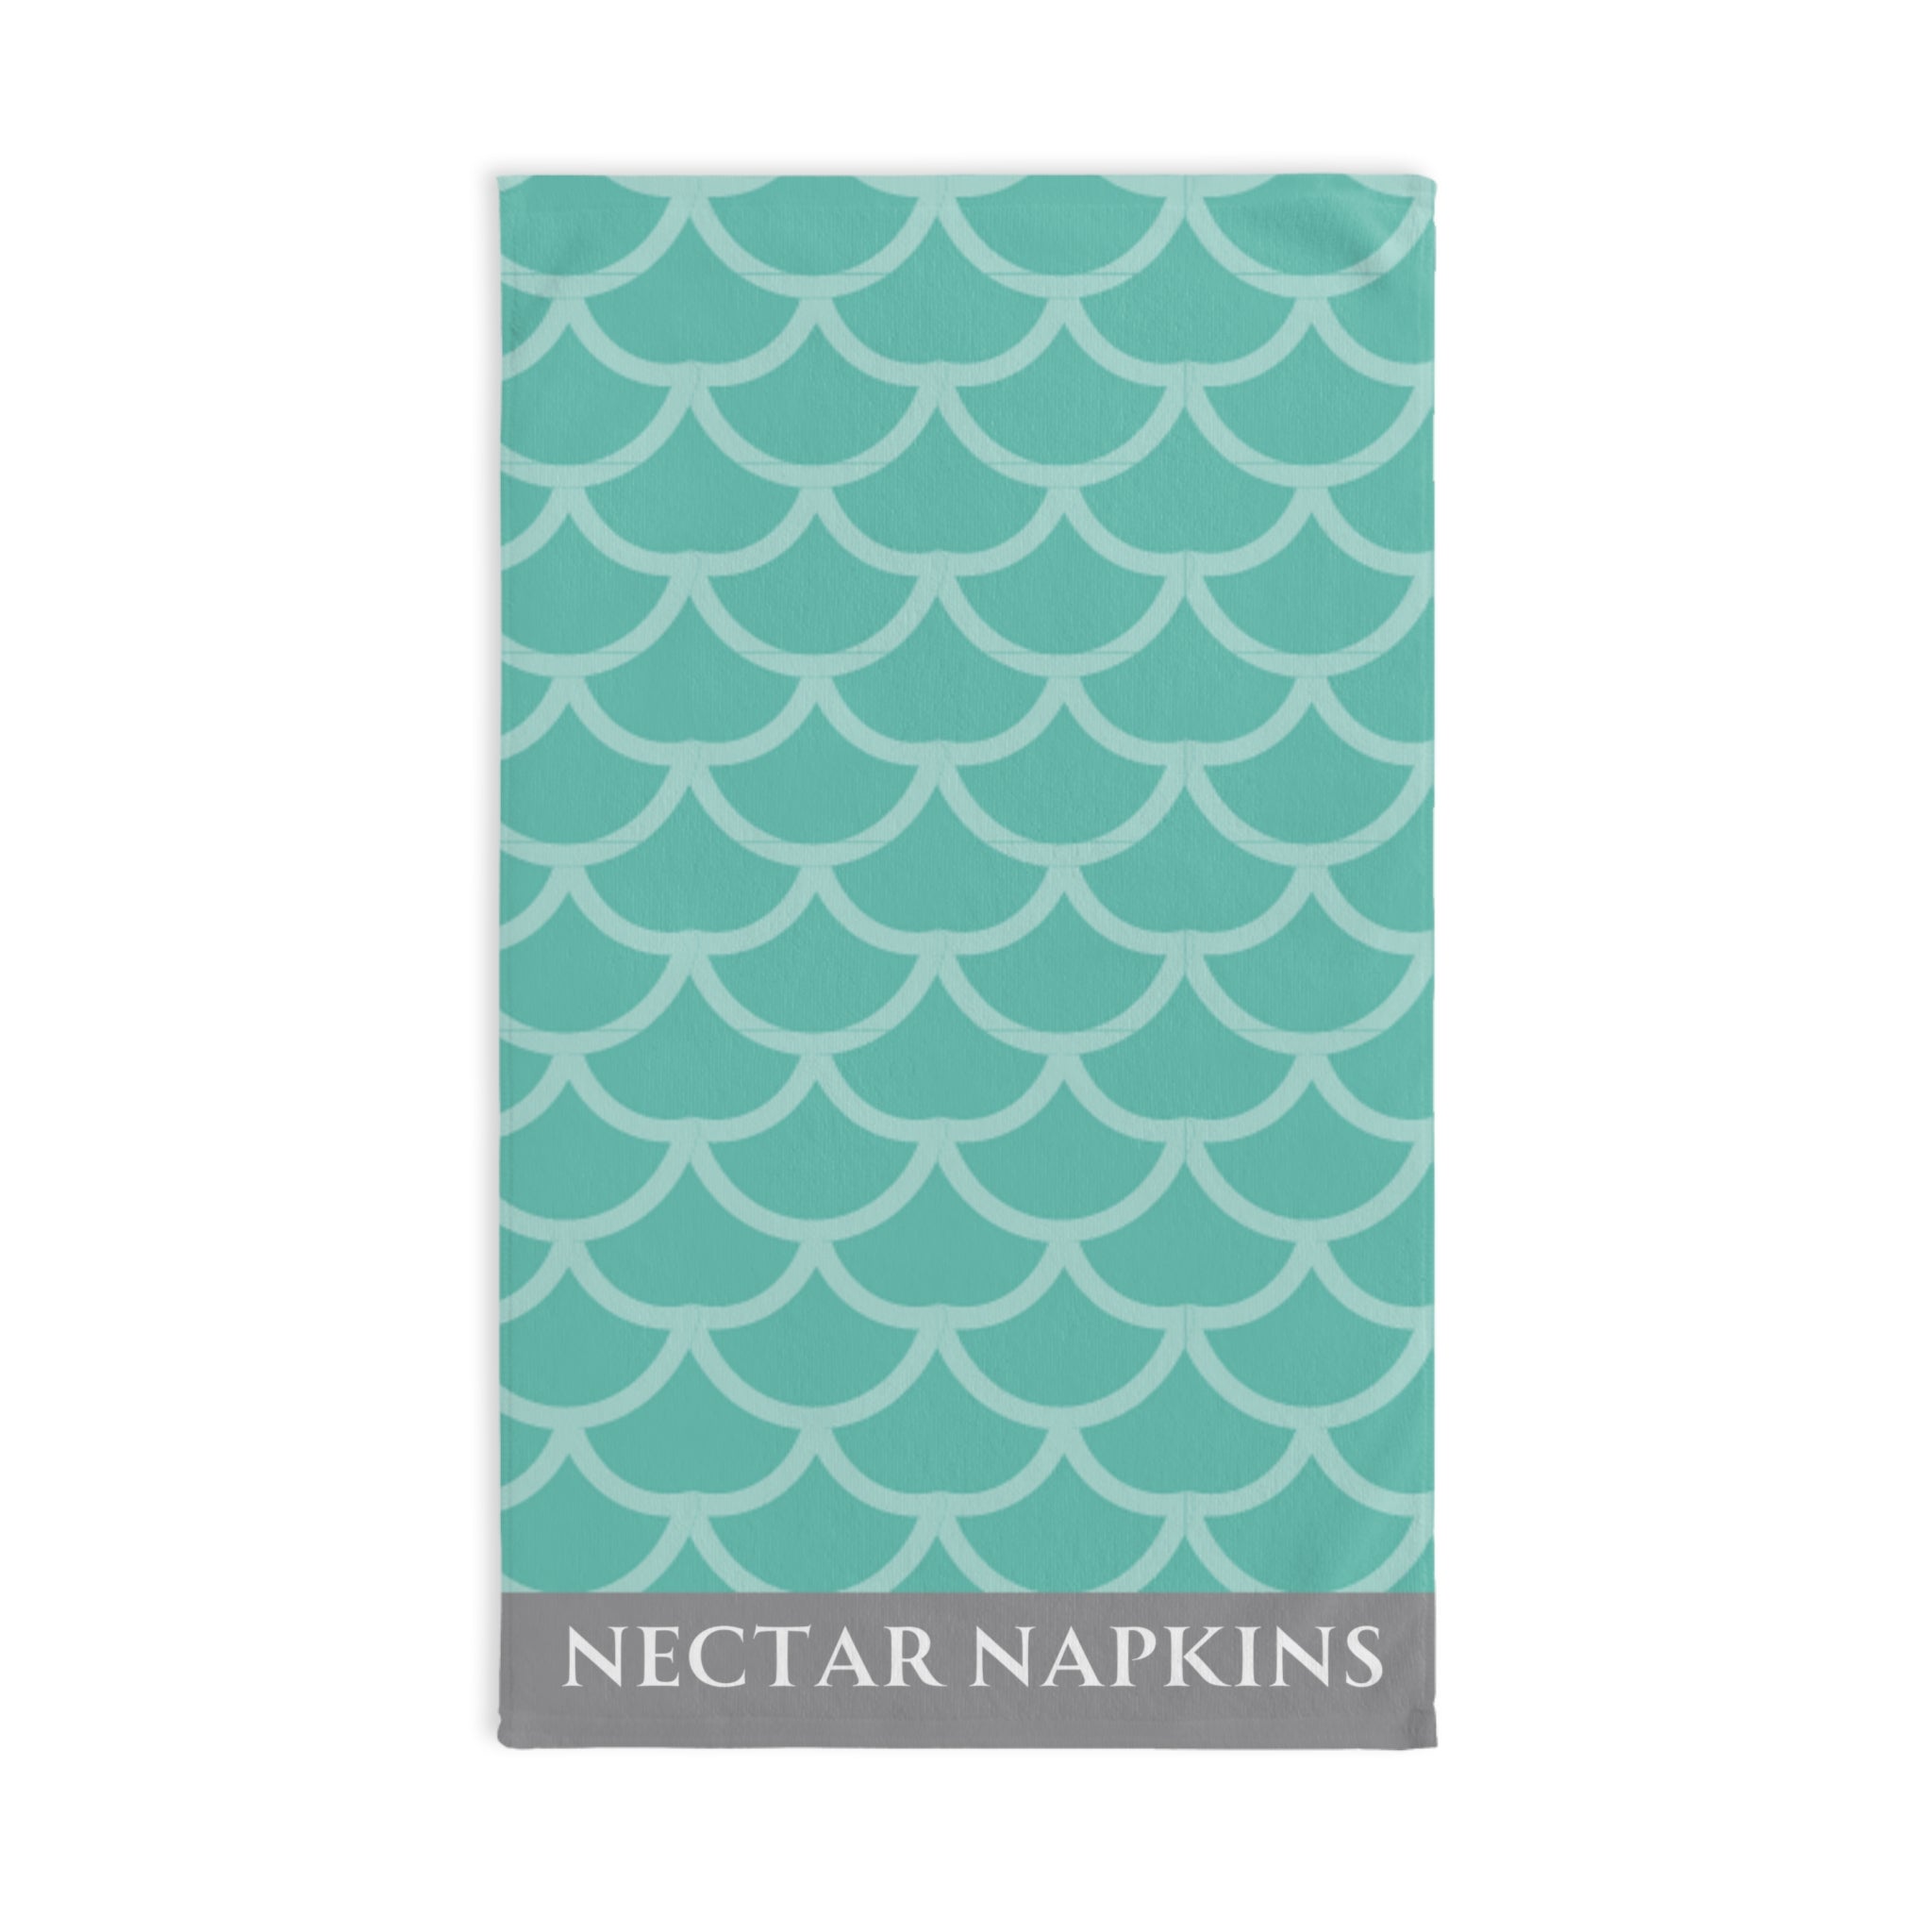 Mermaid Tail Mint Grey | Anniversary Wedding, Christmas, Valentines Day, Birthday Gifts for Him, Her, Romantic Gifts for Wife, Girlfriend, Couples Gifts for Boyfriend, Husband NECTAR NAPKINS